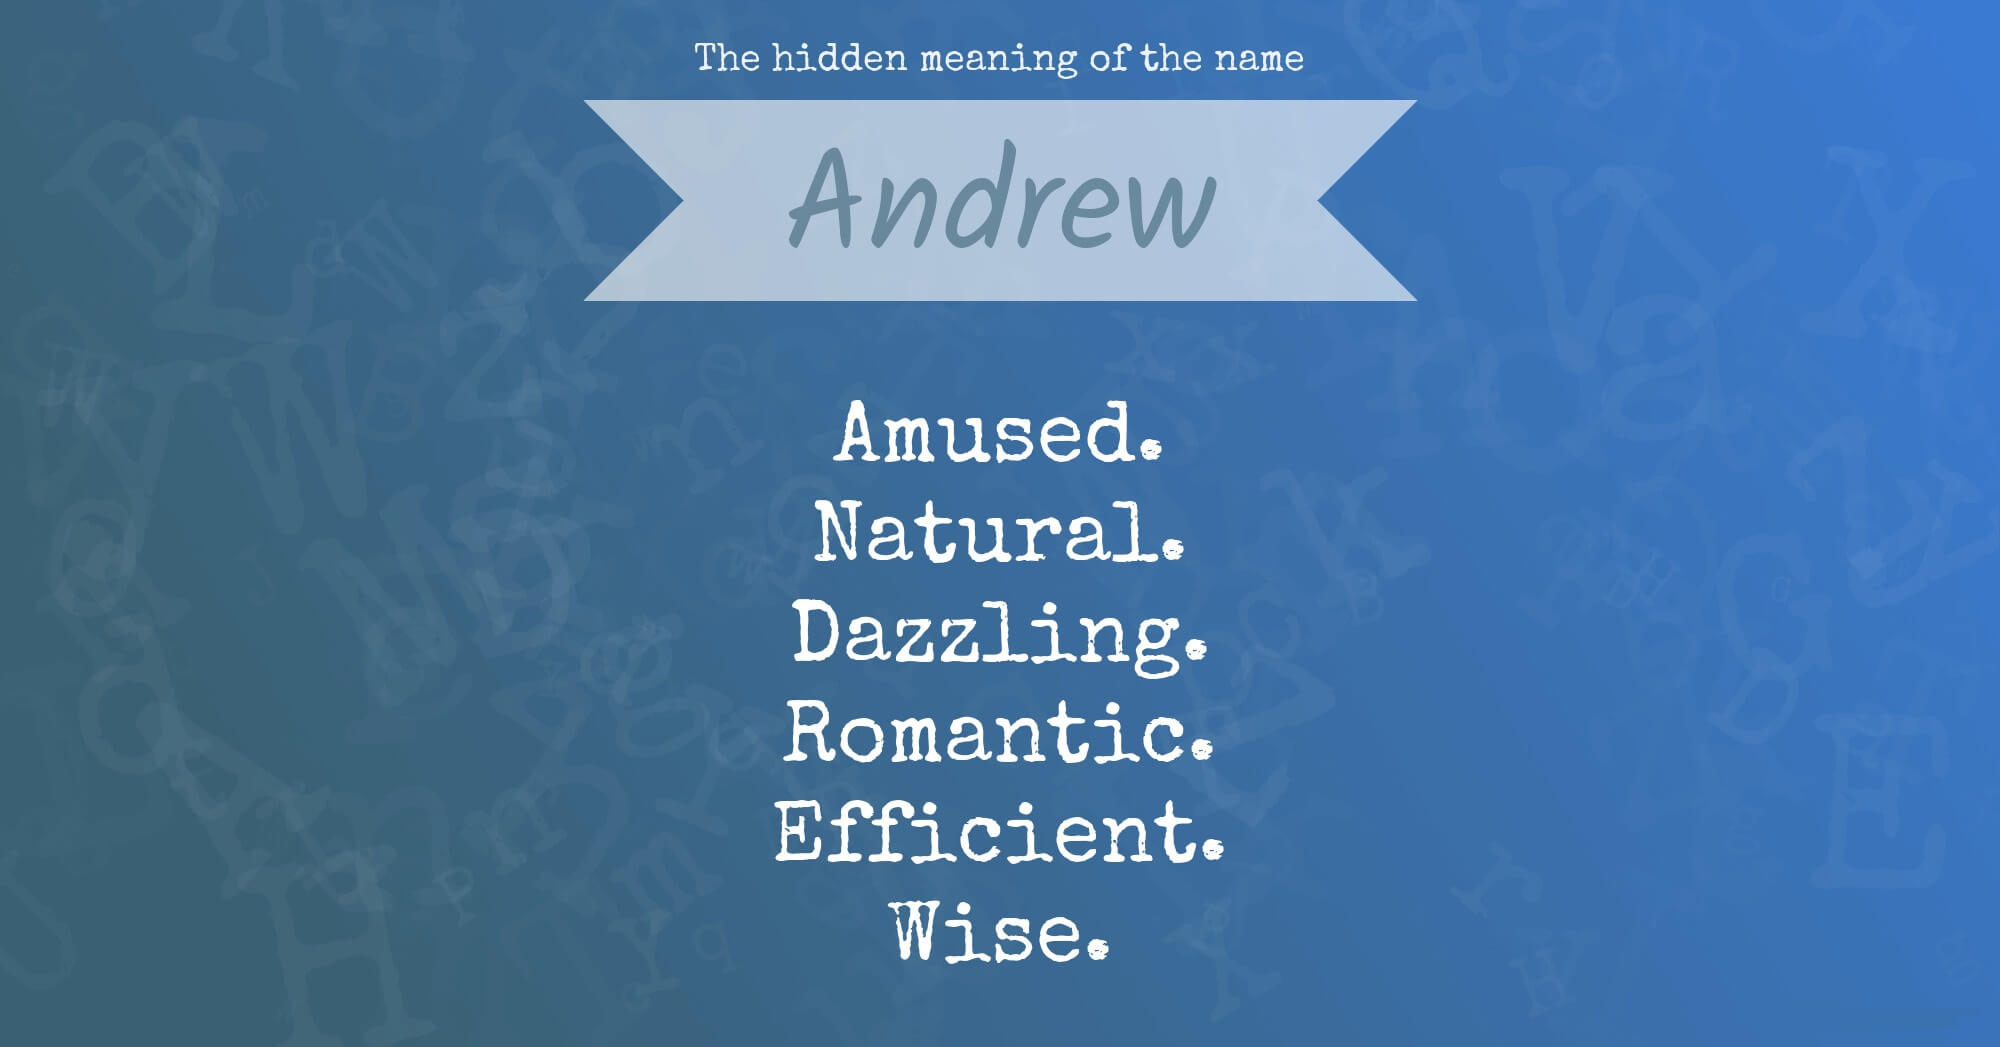 Meaning of the Name Andrew